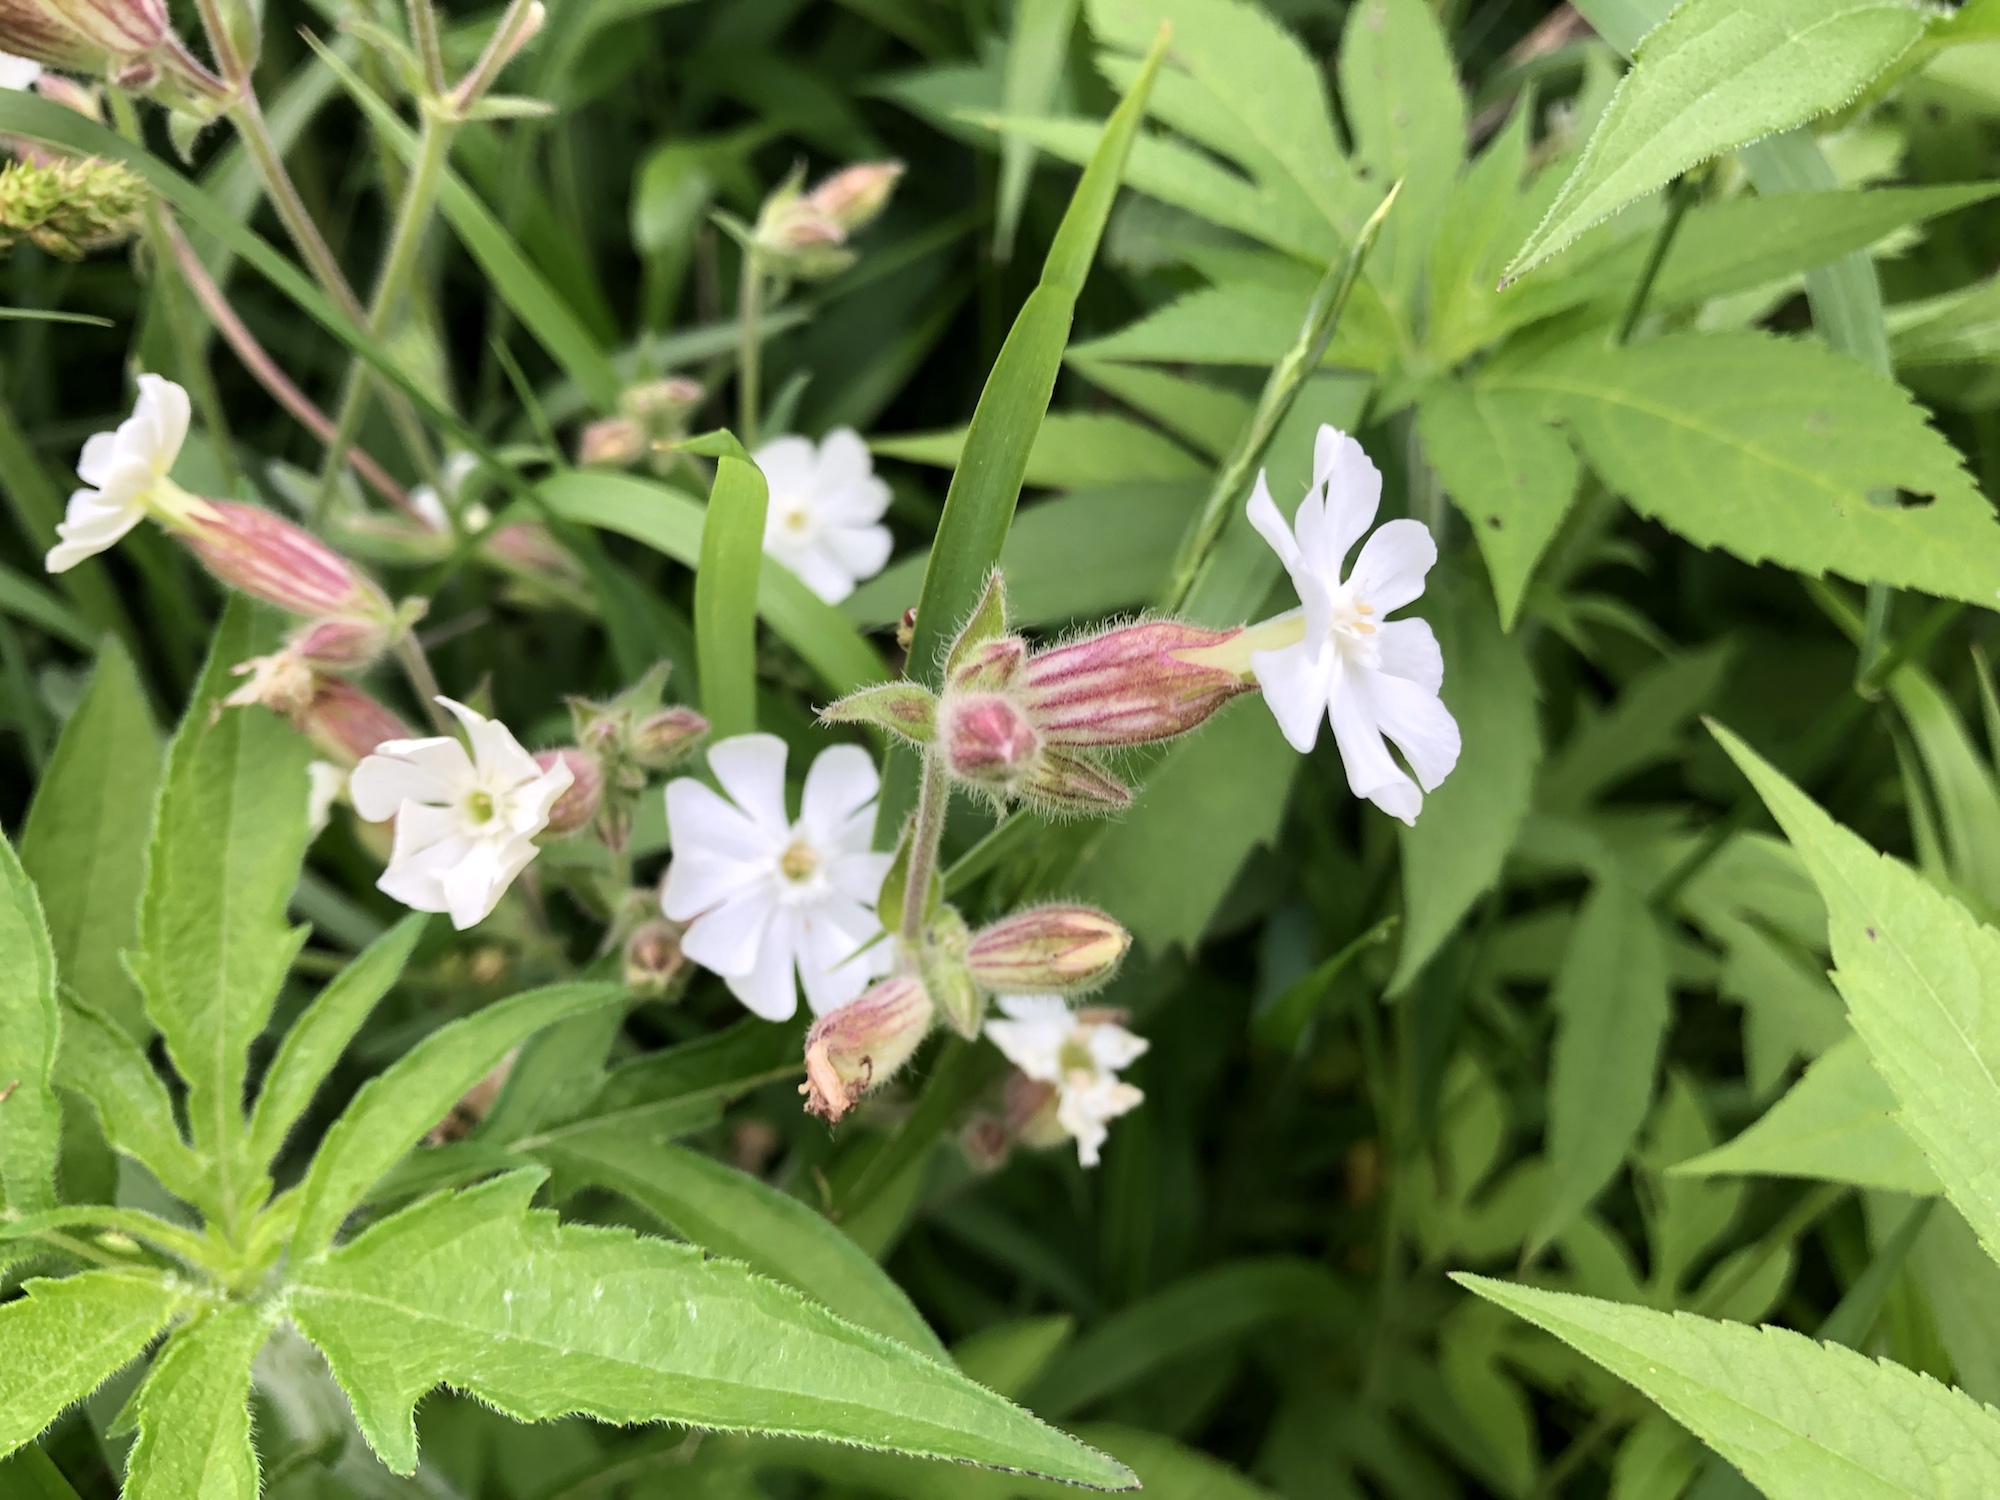 White Campion on the banks of the retaining pond on June 17, 2019.